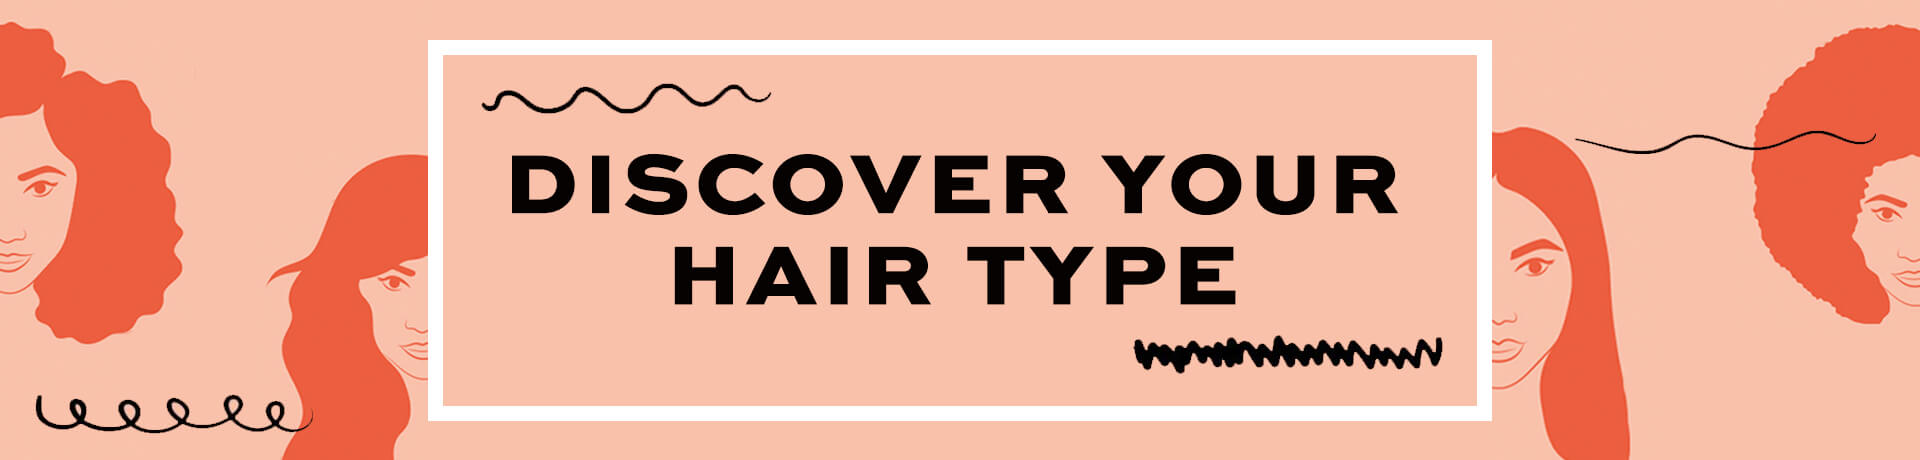 Discover Your Hair Type